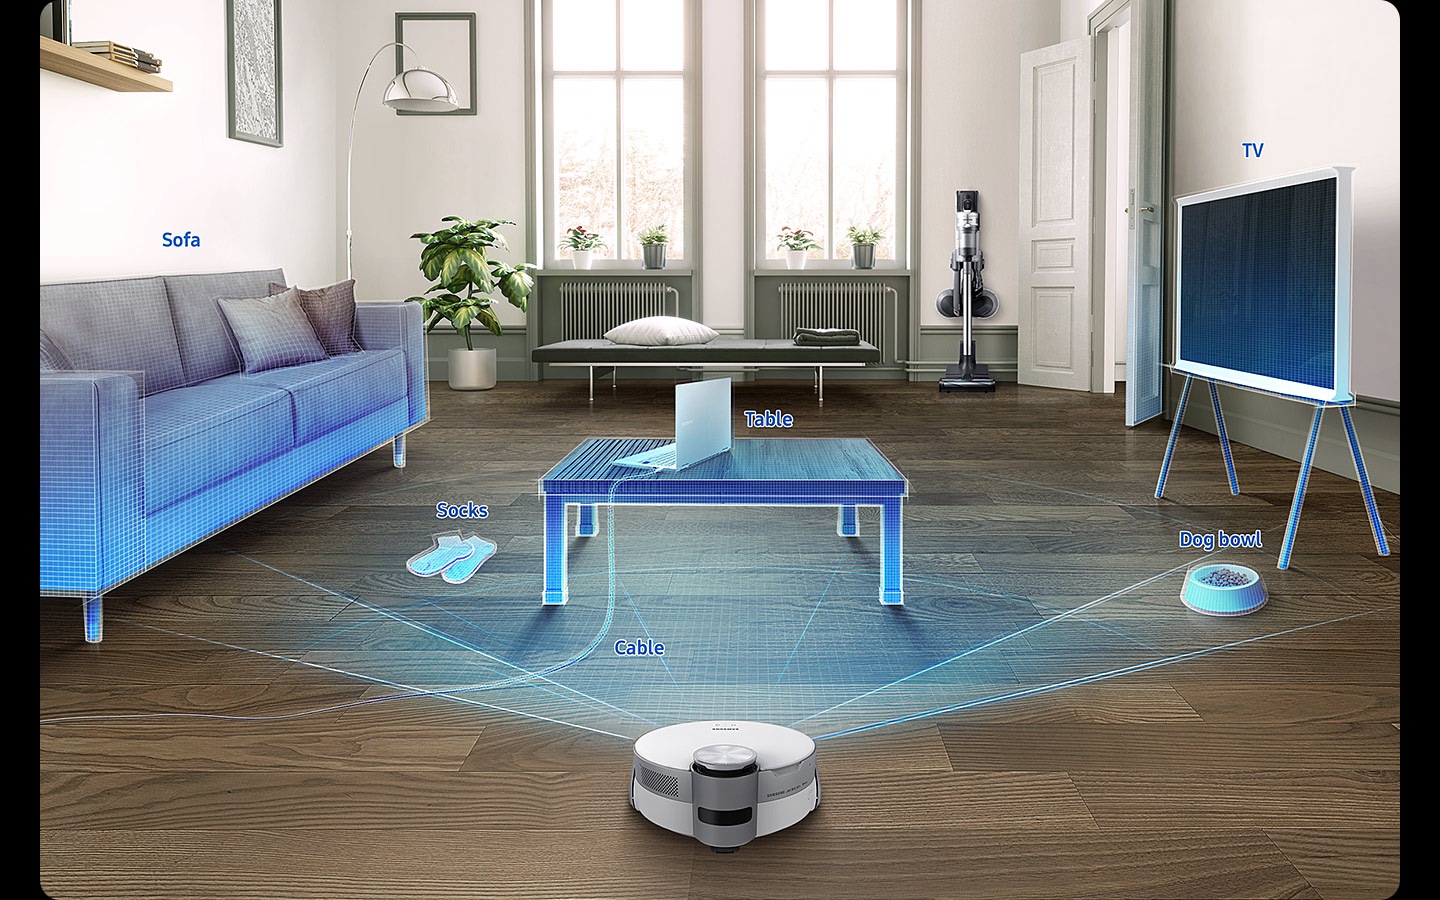 JetBot AI+ uses AI Object Recognition to sense a sofa, cable, table, dog bowl, socks and TV on the floor in front of it to clean closely and effectively around them.